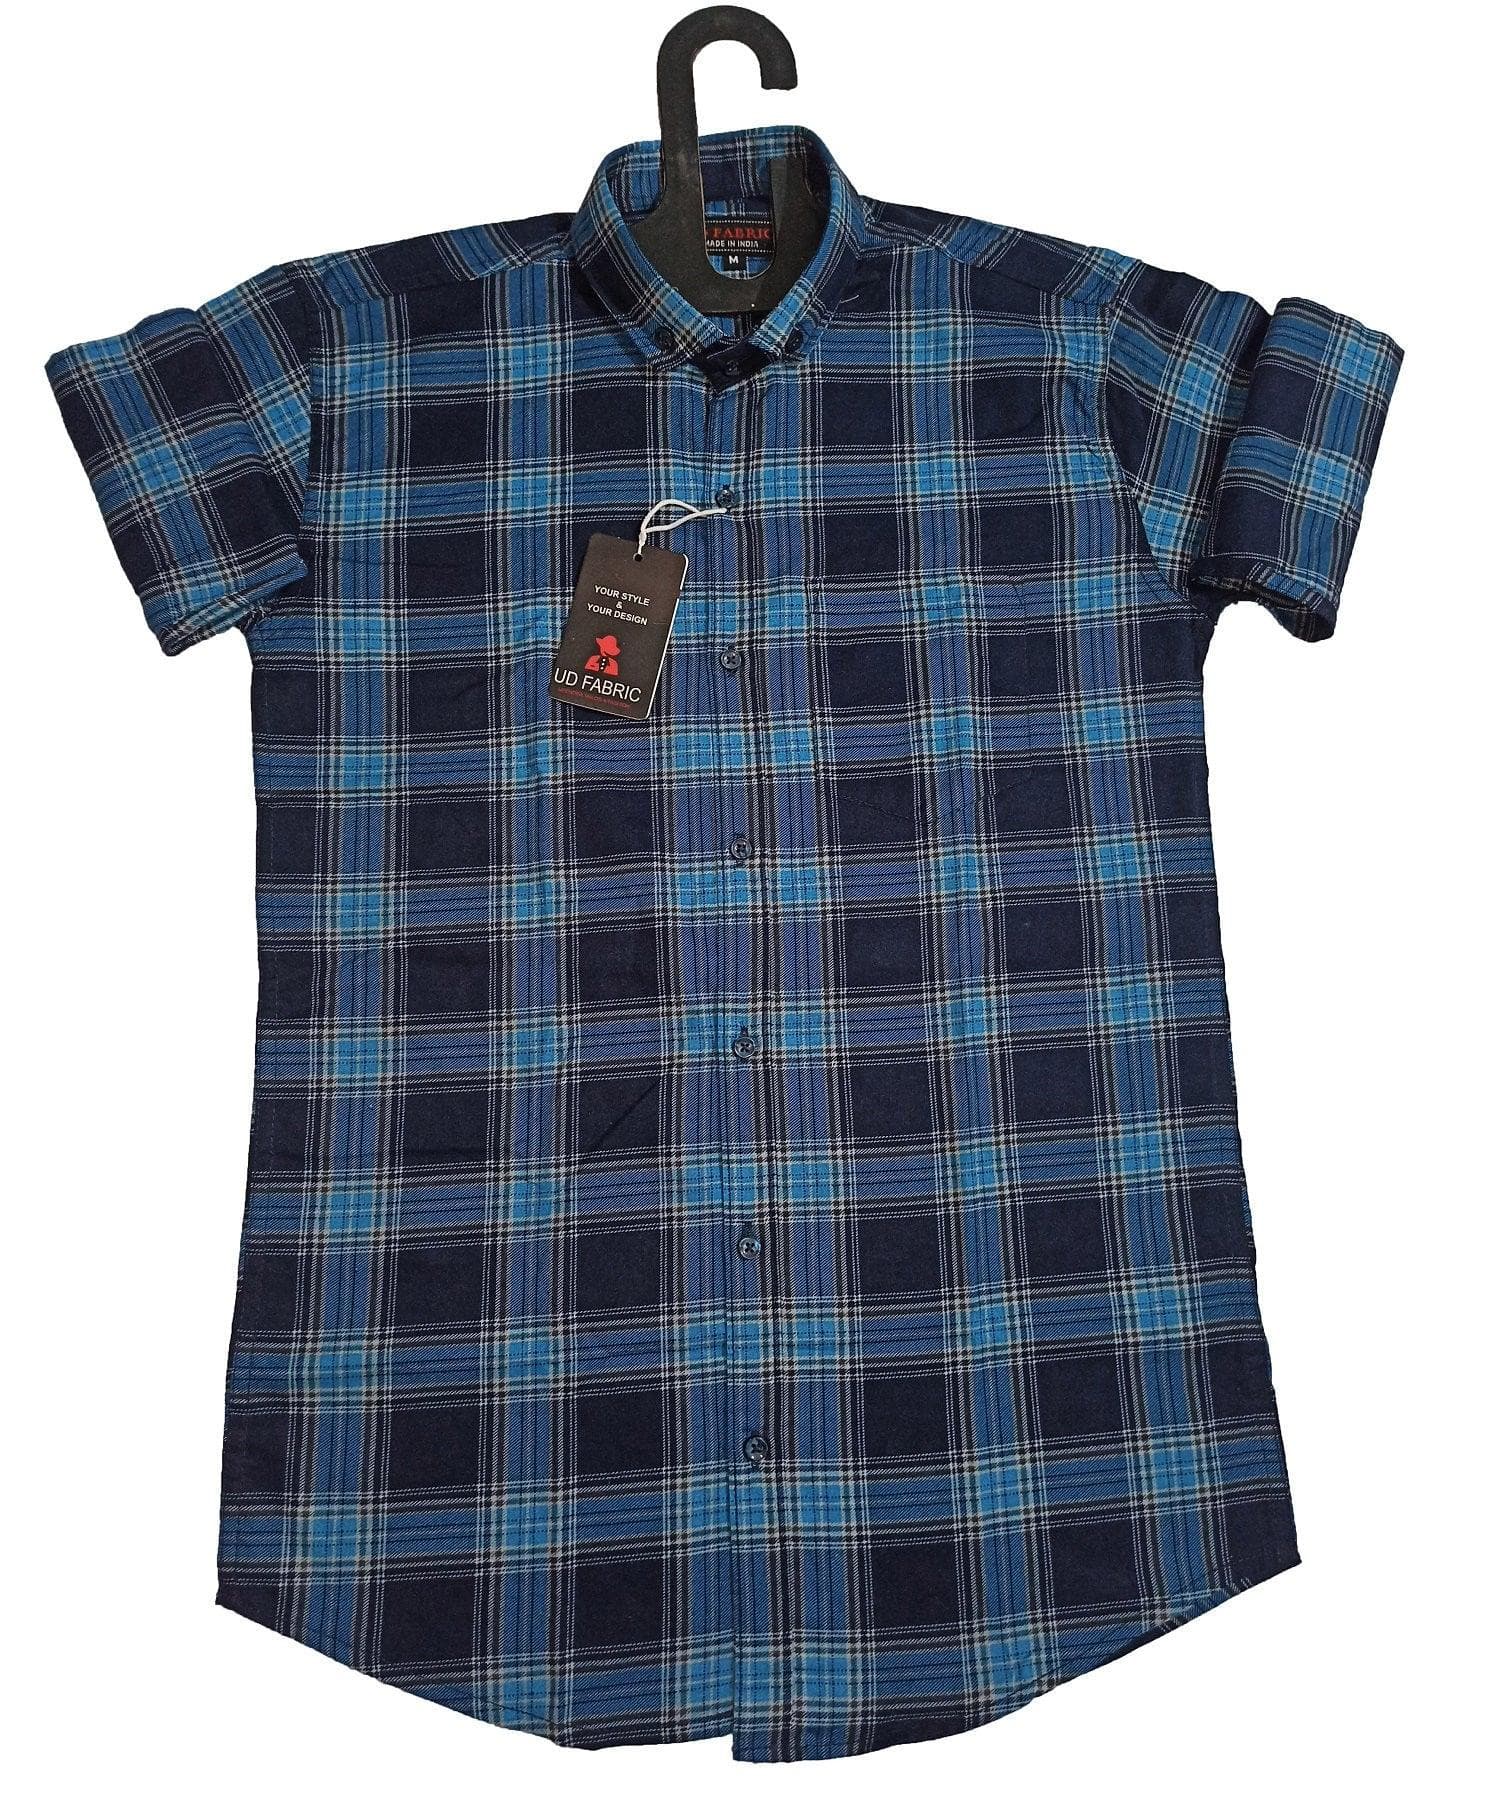 UD FABRIC Men’s Slim Fit Check Casual Shirt - Navy-Blue - UD FABRIC - Your Style our Design